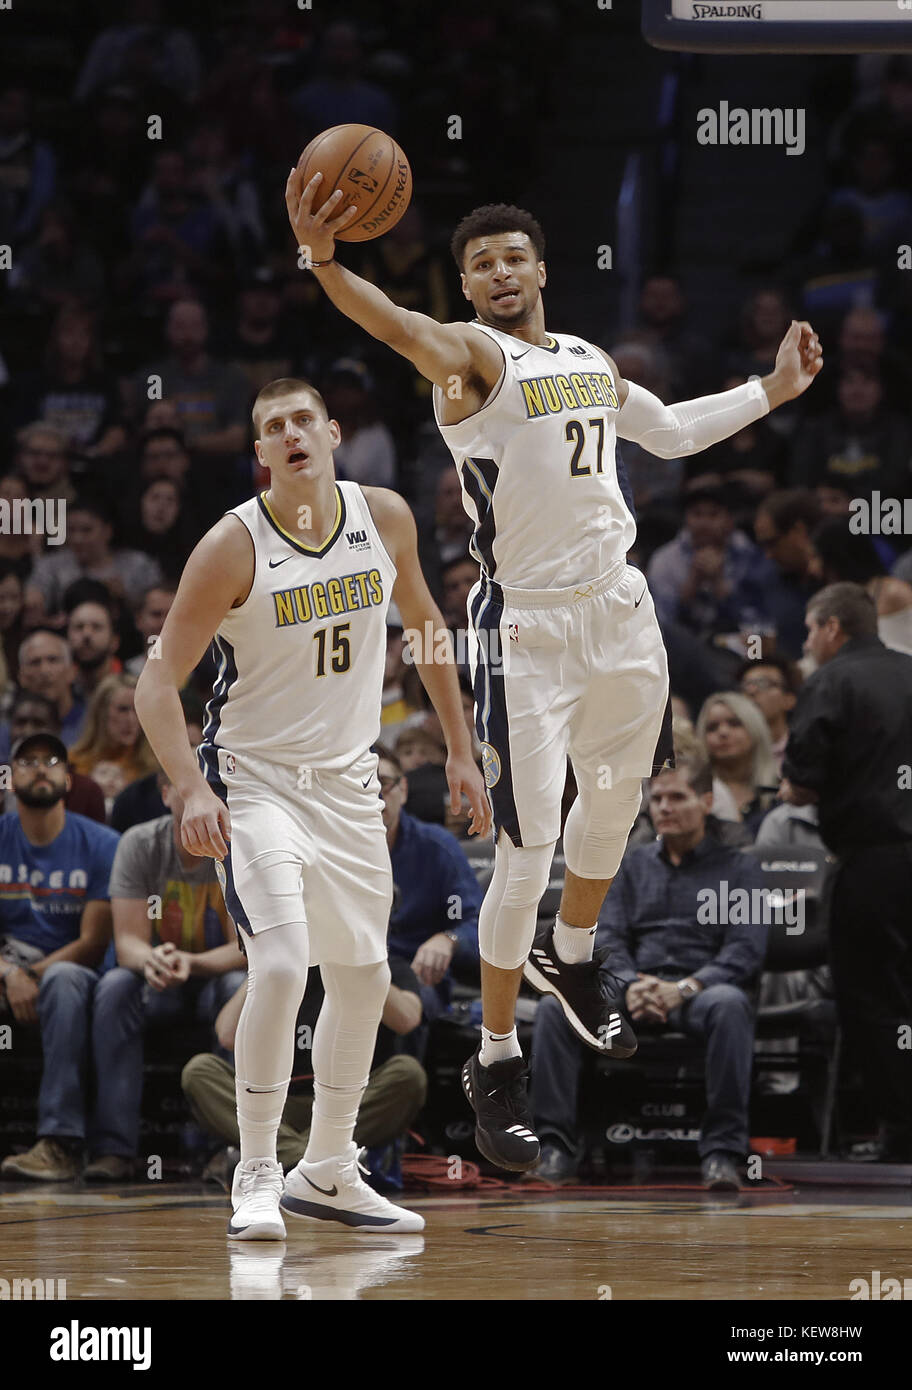 Denver, Colorado, USA. 23rd Oct, 2017. Nuggets JAMAL MURRAY, right, grabs a rebound during the 1st. Half at the Pepsi Center Monday night. The Nuggets lose to the Wizards 109-104 Credit: Hector Acevedo/ZUMA Wire/Alamy Live News Stock Photo